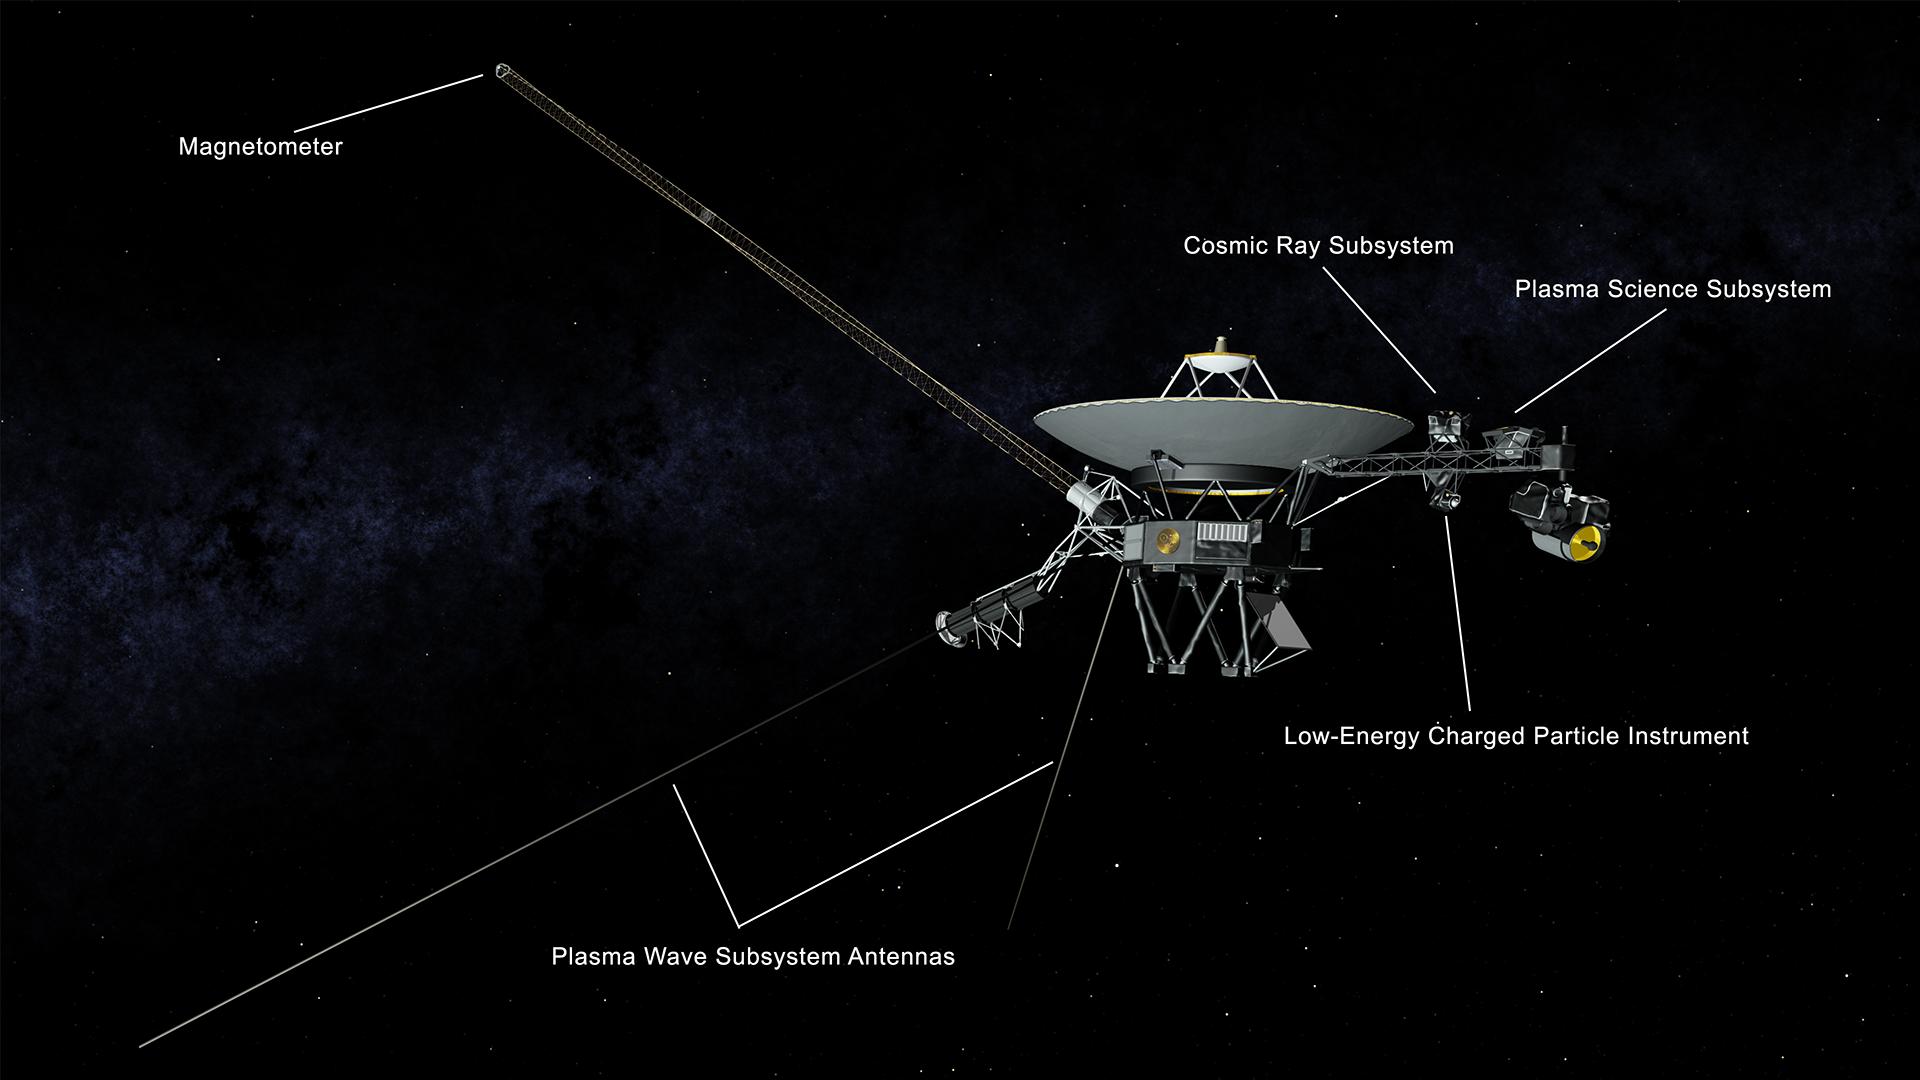 Voyager with instruments explained